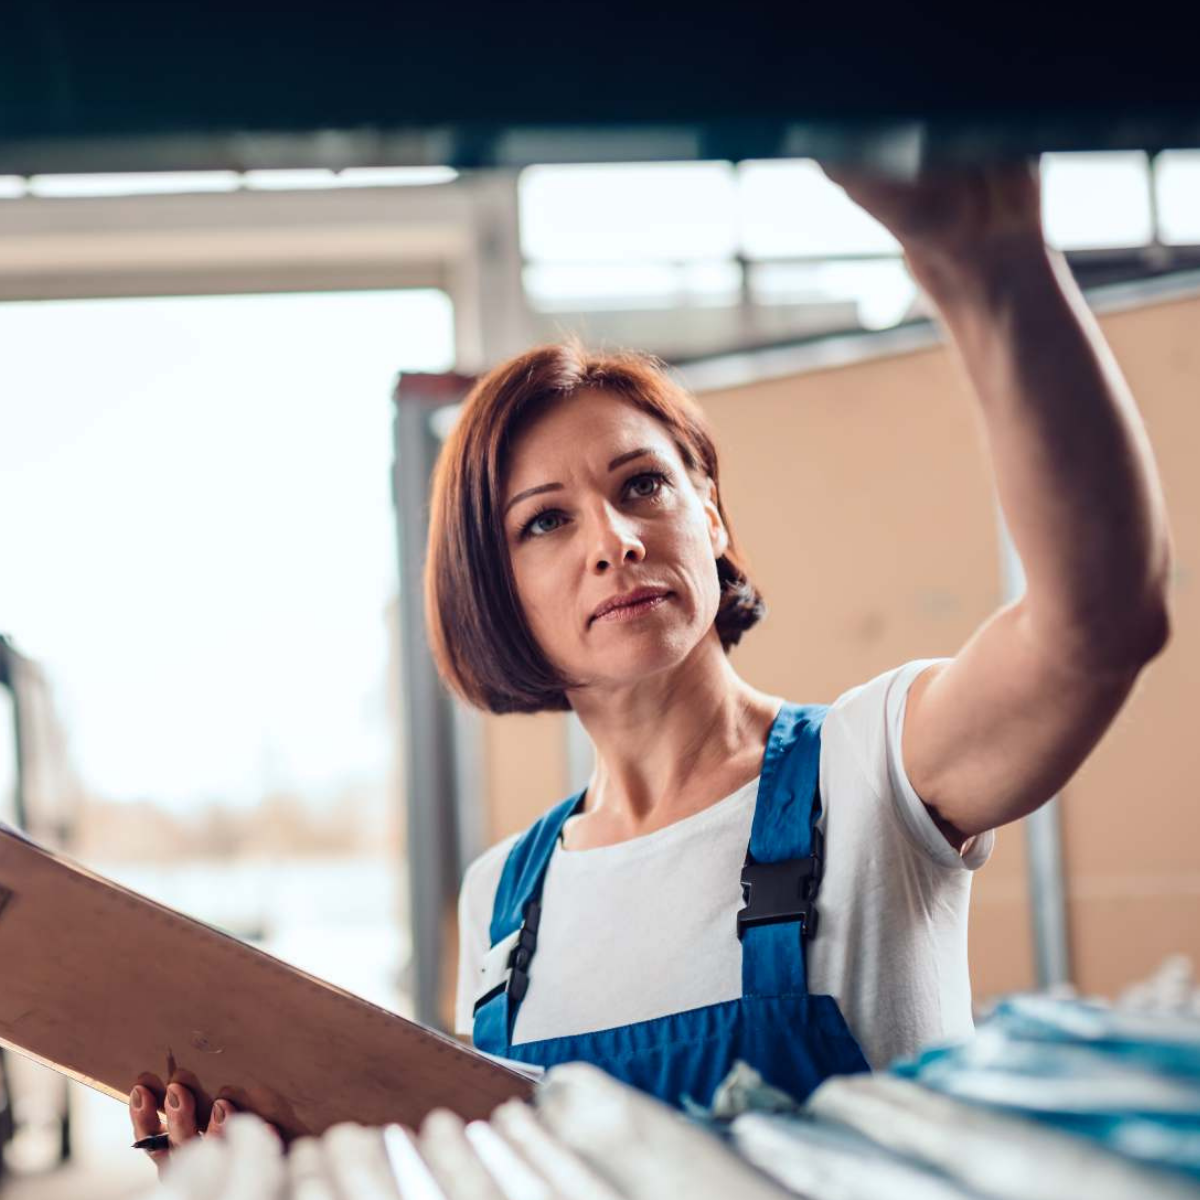 Woman shipping clerk examining shelf of products in a warehouse